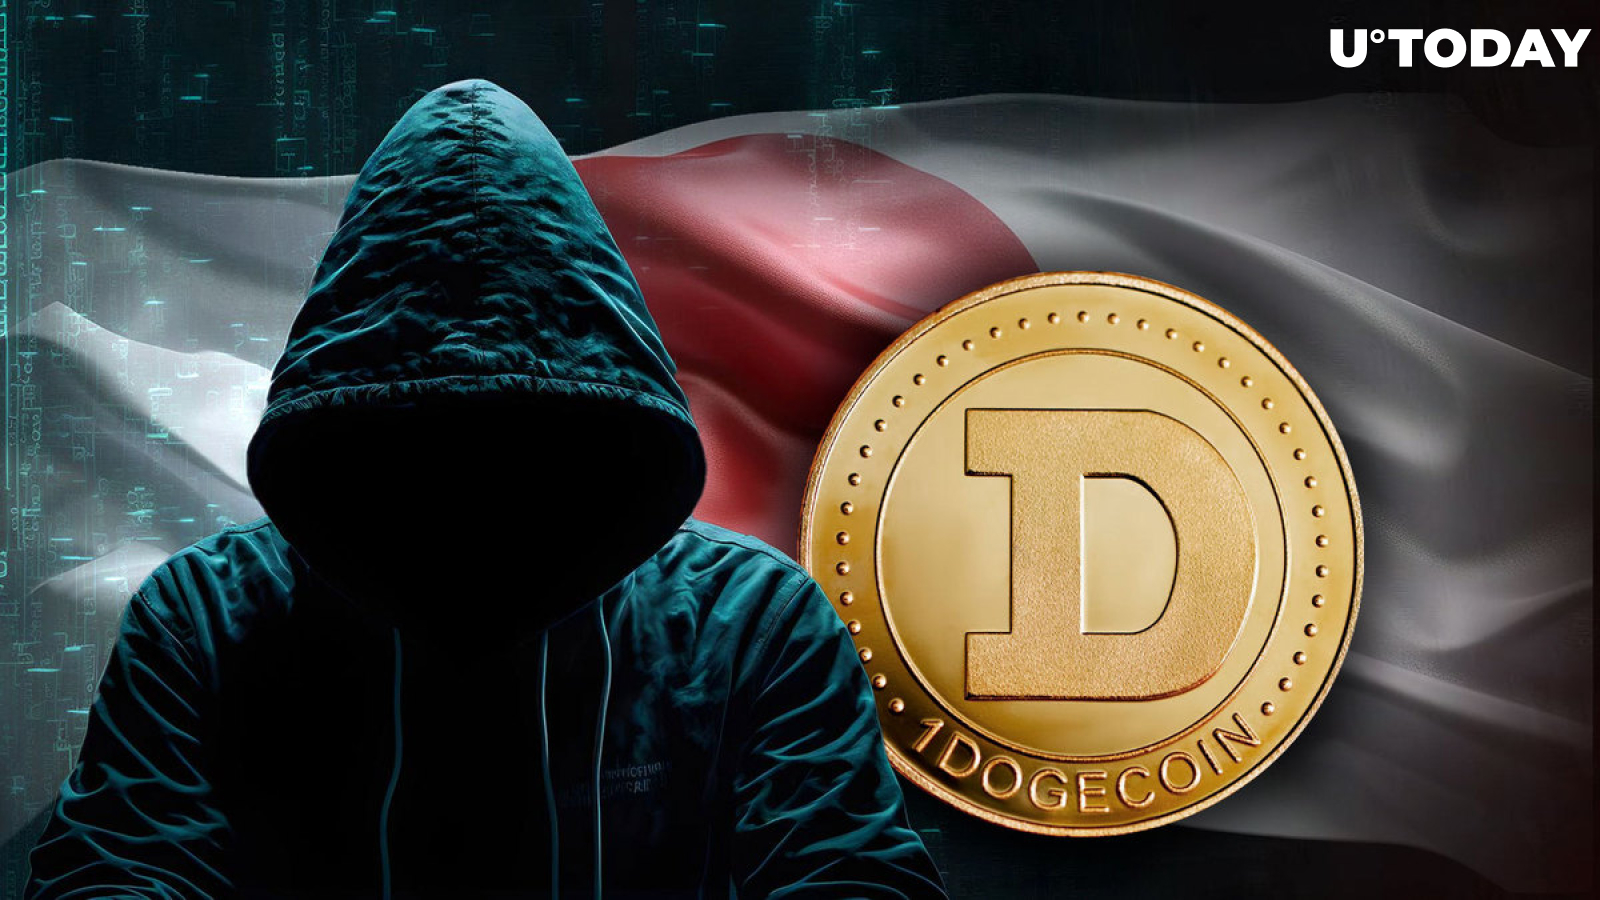 DOGE Founder Has 8,600 Worth of DOGE Stolen, Here's What Happened